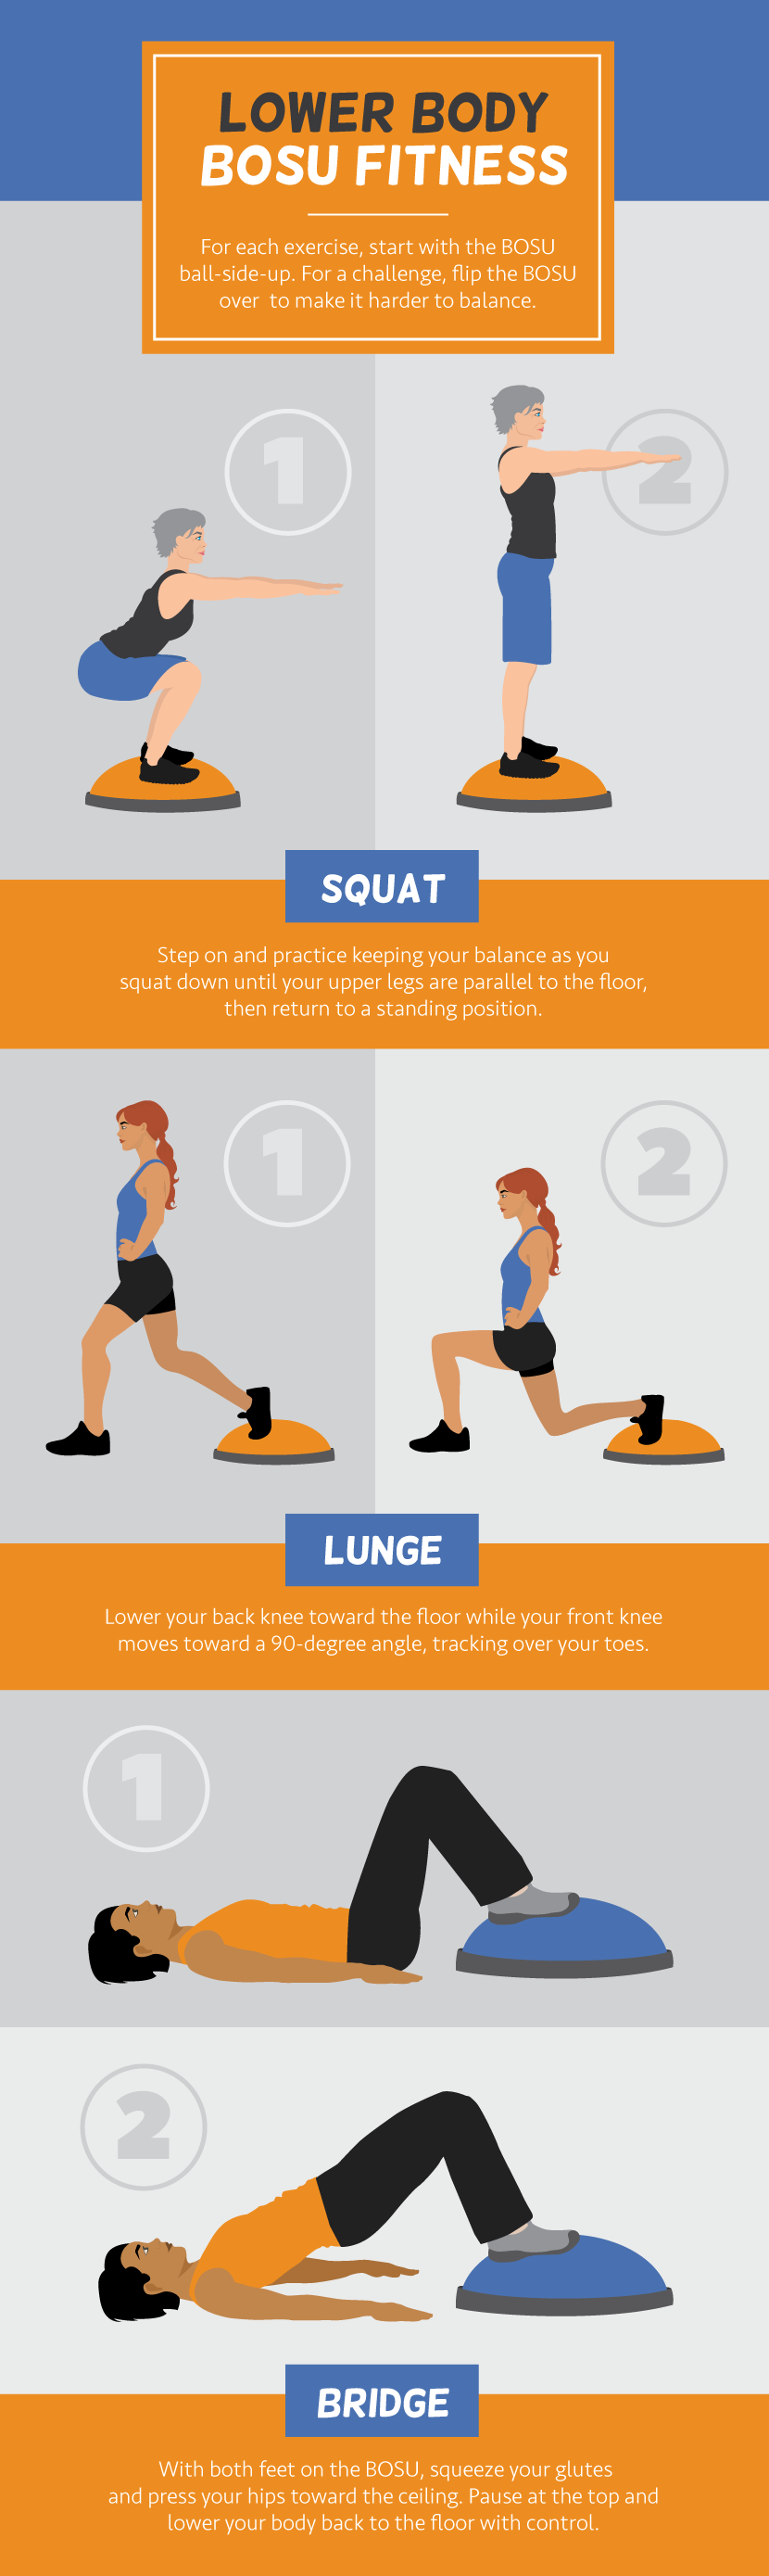 Bosu ball mistakes: Tips to use a Bosu ball for weight loss to avoid injury